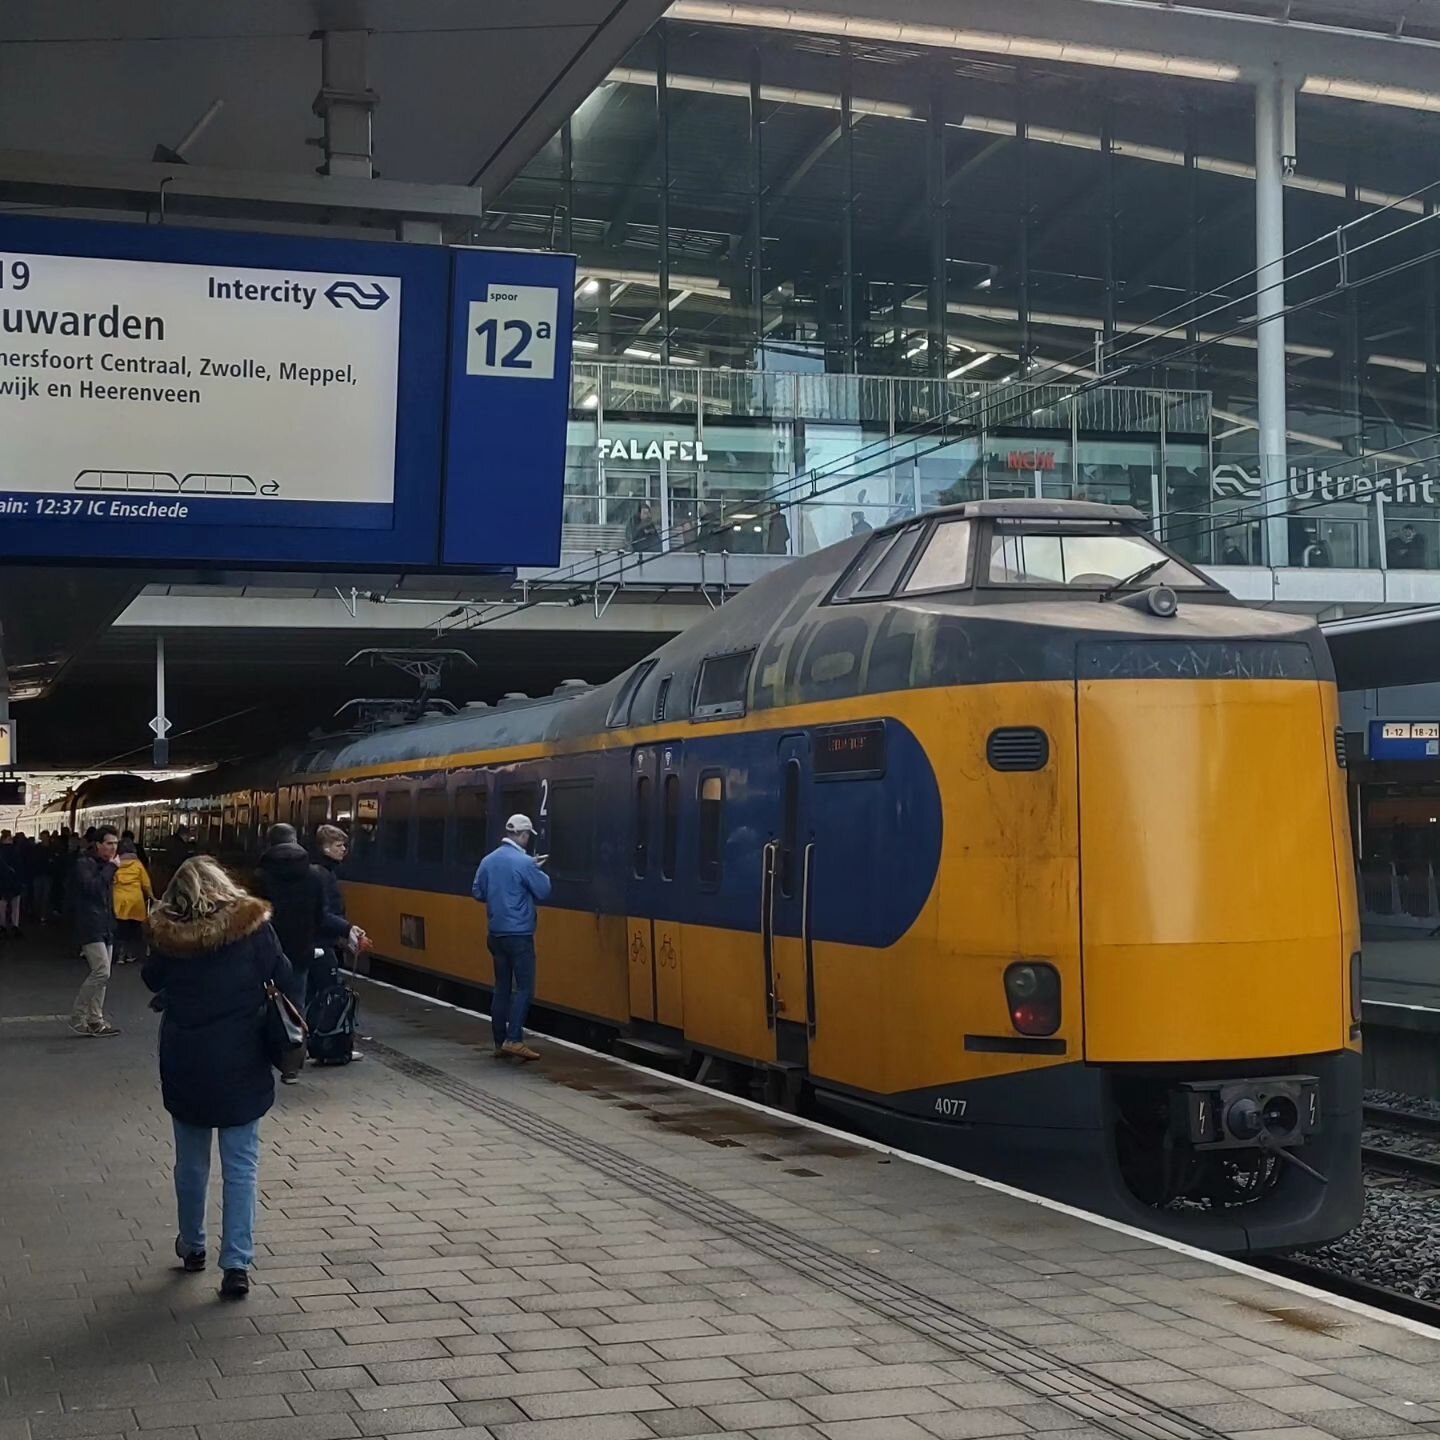 It doesn't get more Dutch than those big yellow/blue NS trains 😎

Just came back from a trip to the Netherlands 🇳🇱 feeling very fortunate for the opportunity to travel and visiting friends and family 💕

Lots of train rides, doggy cuddles, concert